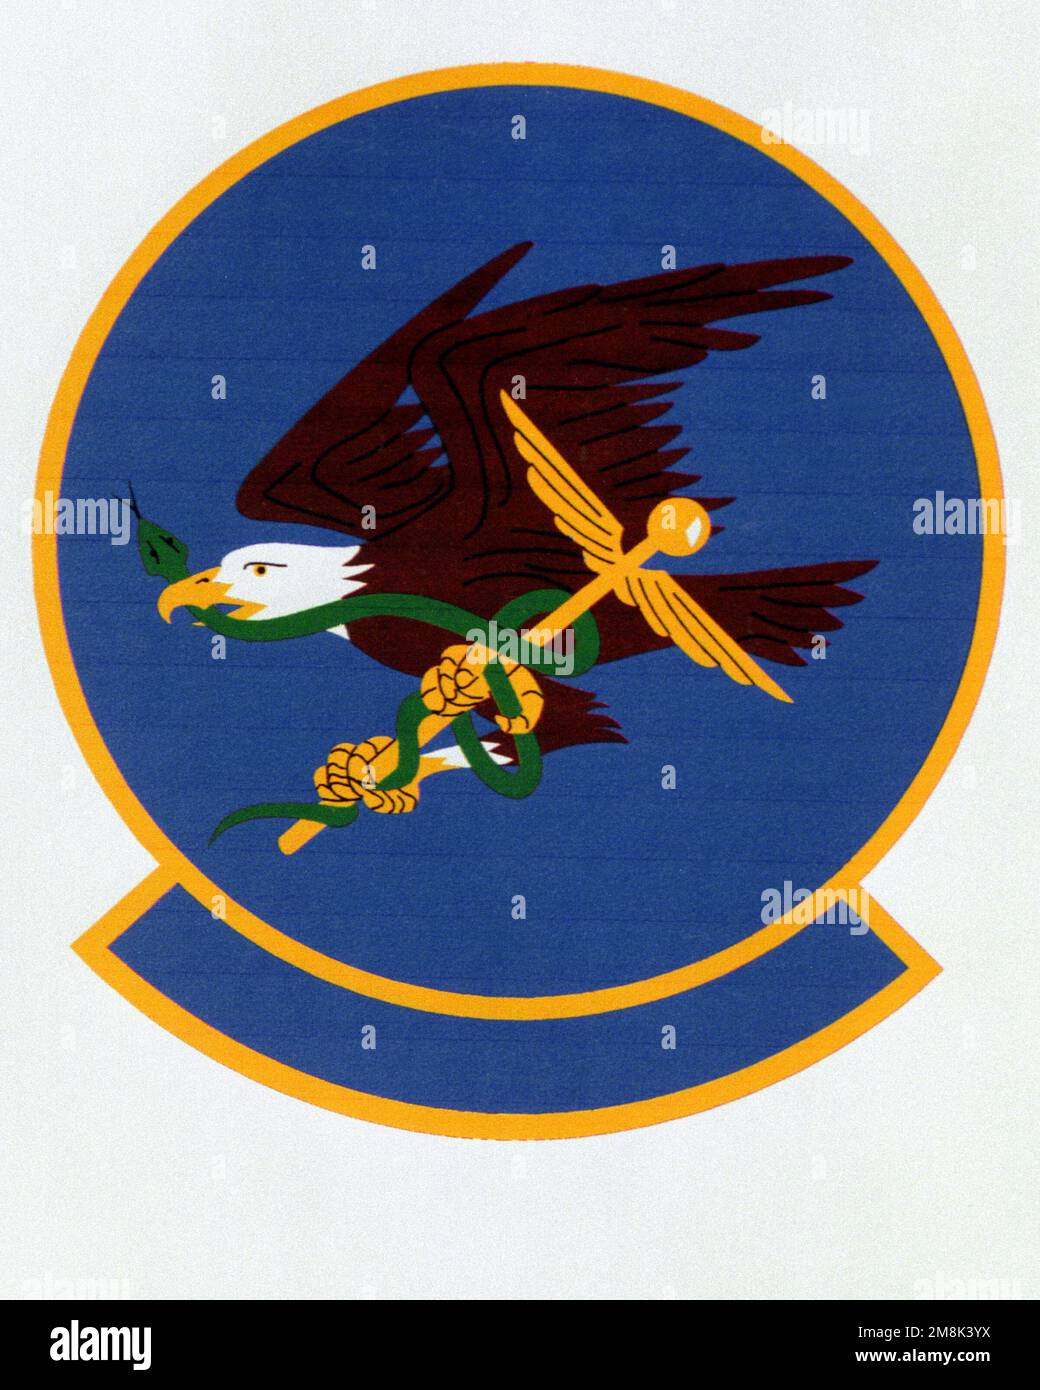 Patch designed and shot at MAXWELL AIR FORCE BASE, ALABAMA, USA - AIR FORCE ORGANIZATIONAL EMBLEMS - 1995...325th Aerospace Medicine Squadron - Exact date shot unknown. Air Force Historical Research Agency, 95-233. Country: Unknown Stock Photo